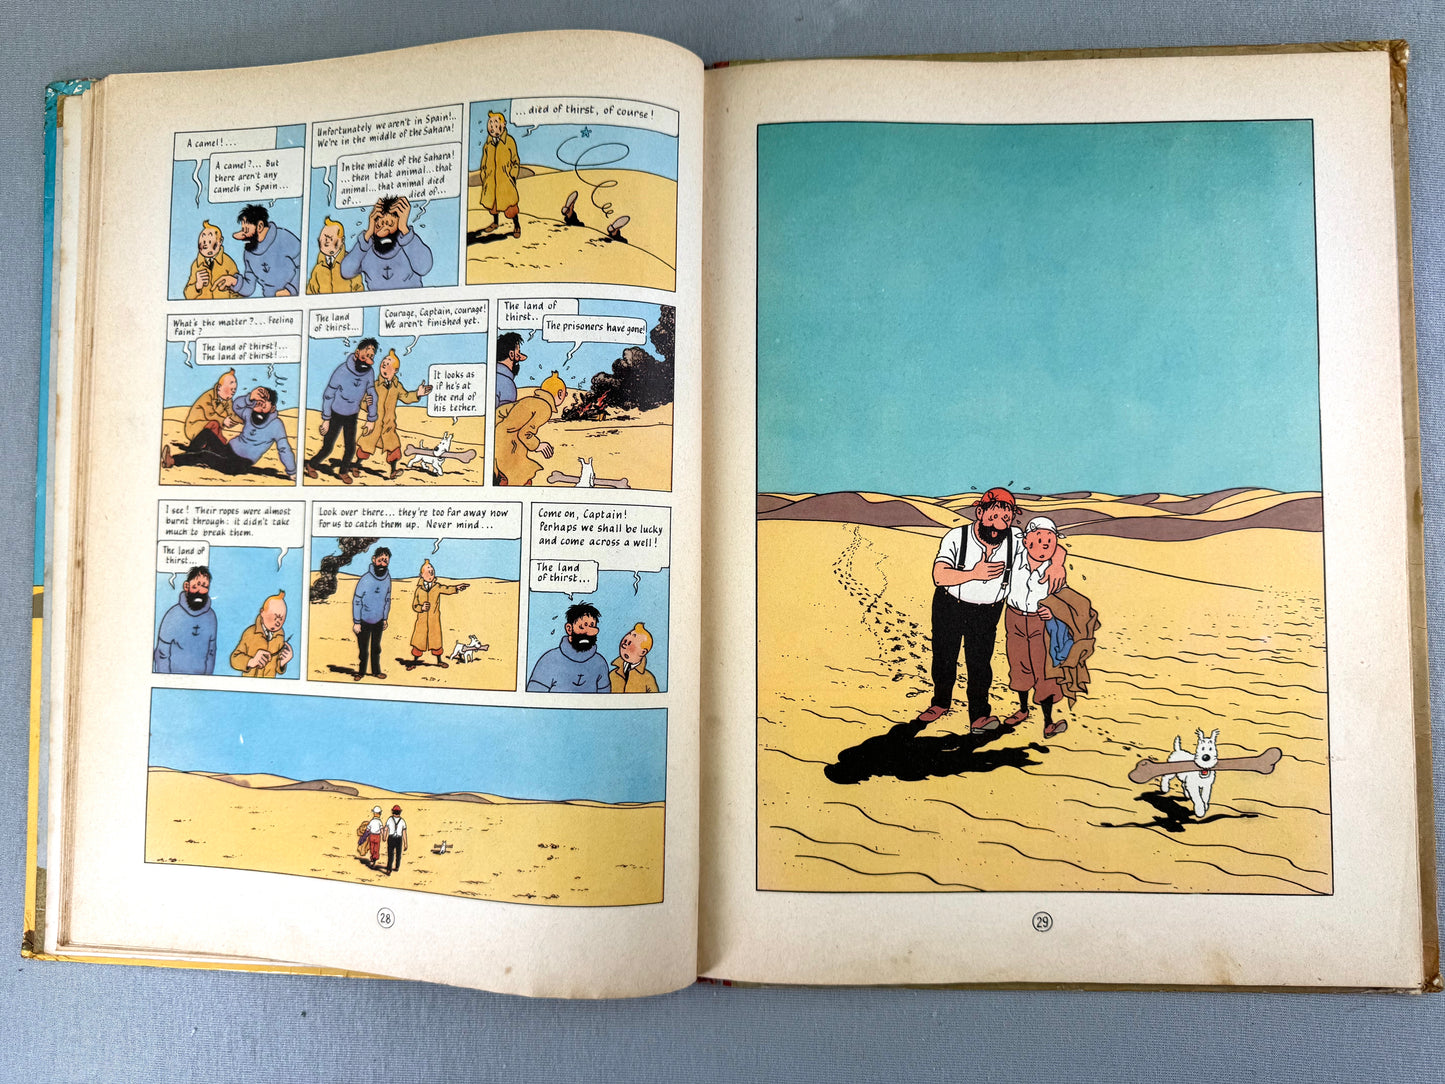 The Crab with the Golden Claws Methuen 1958 1st Edition Hardback Rare Tintin book Herge EO